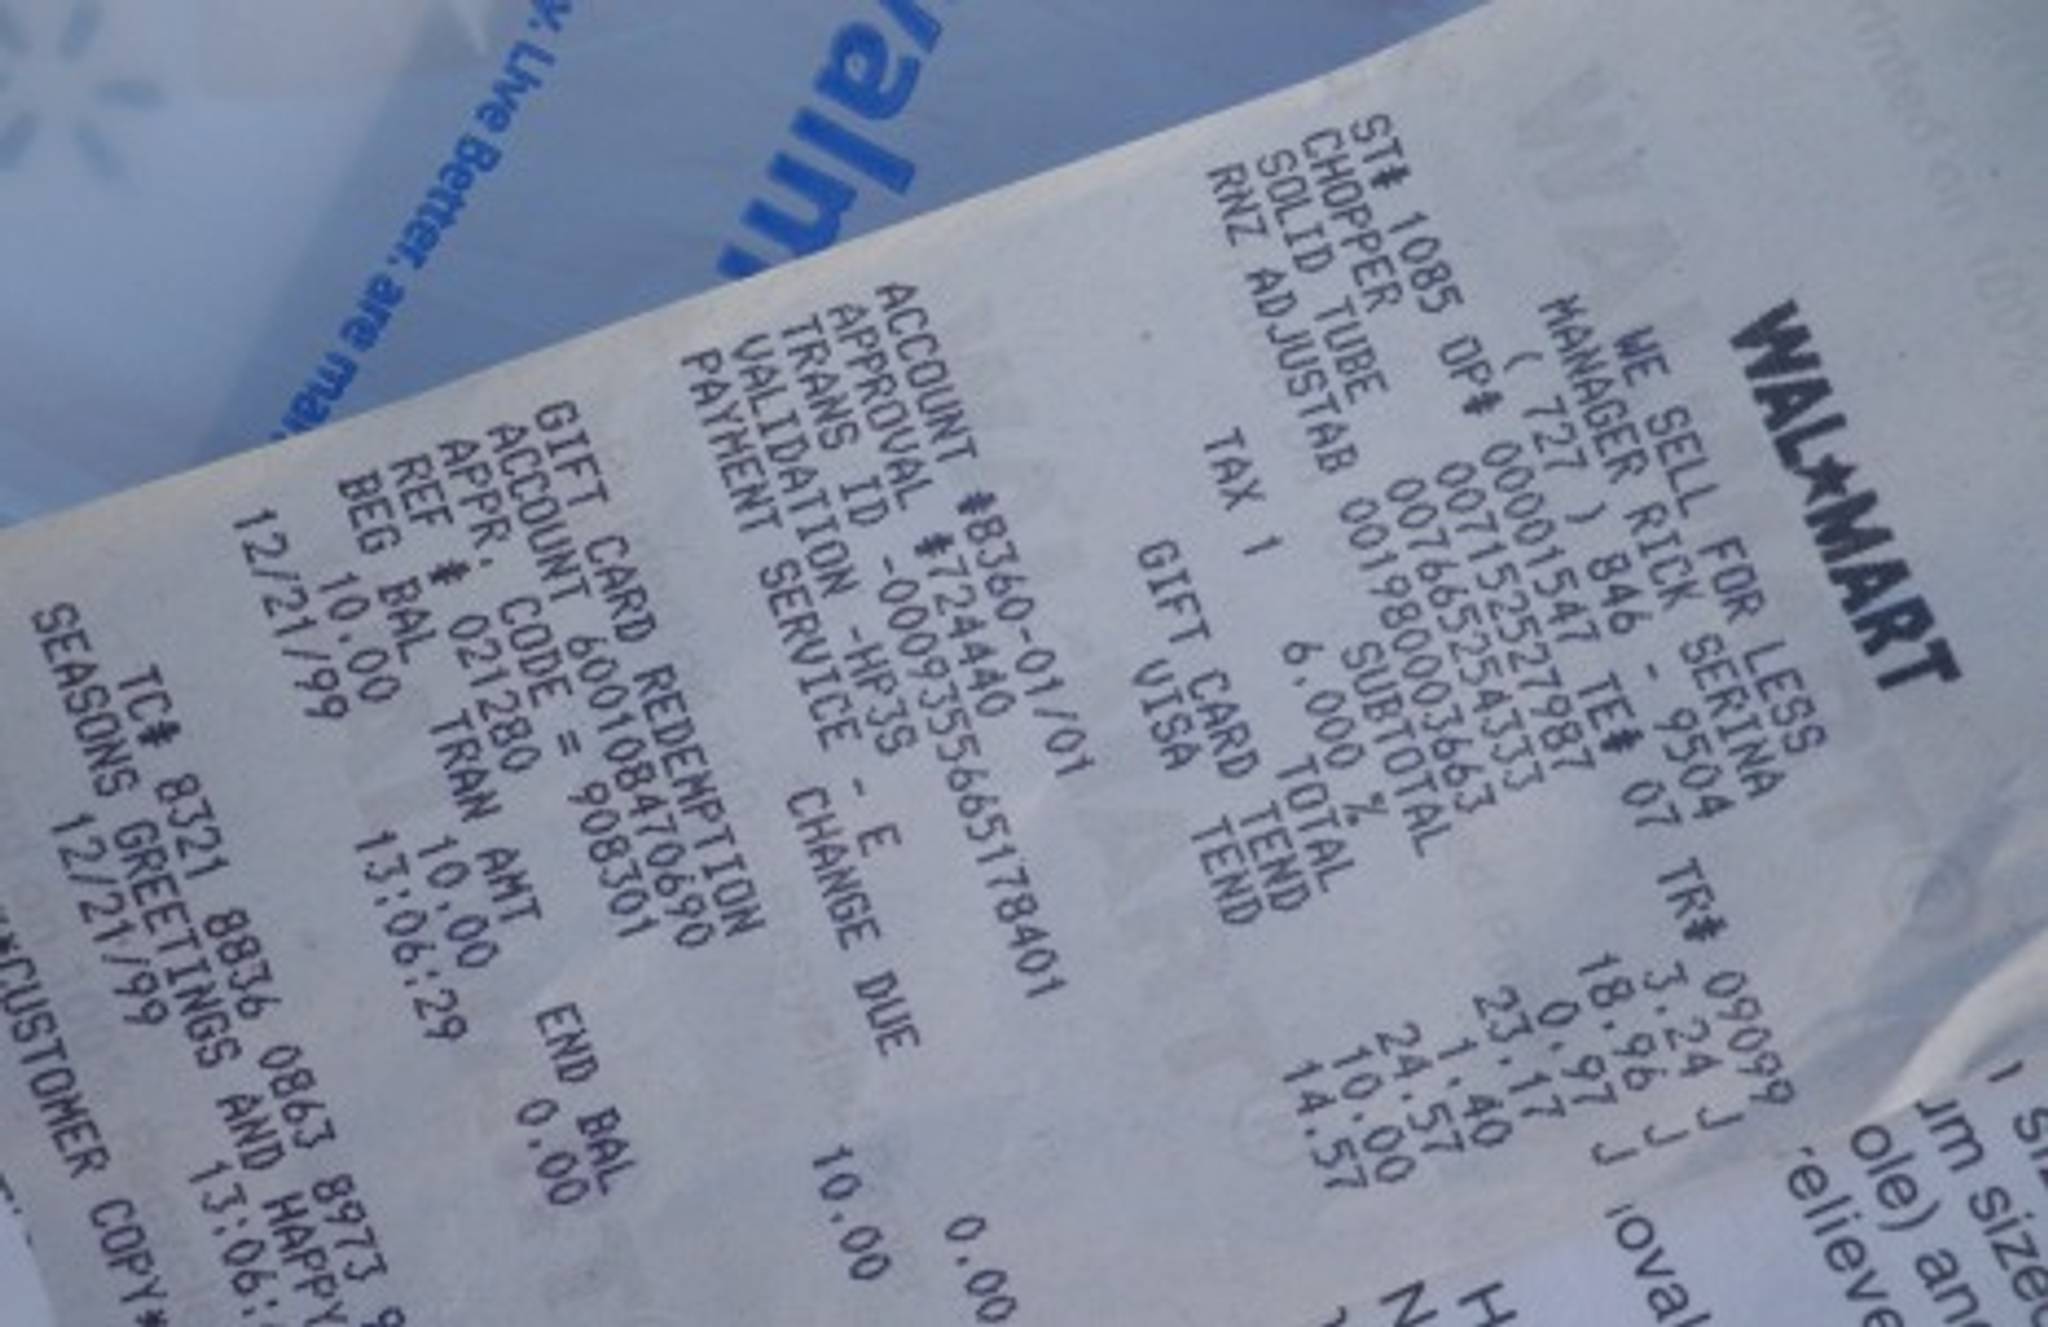 Get health advice from your receipts